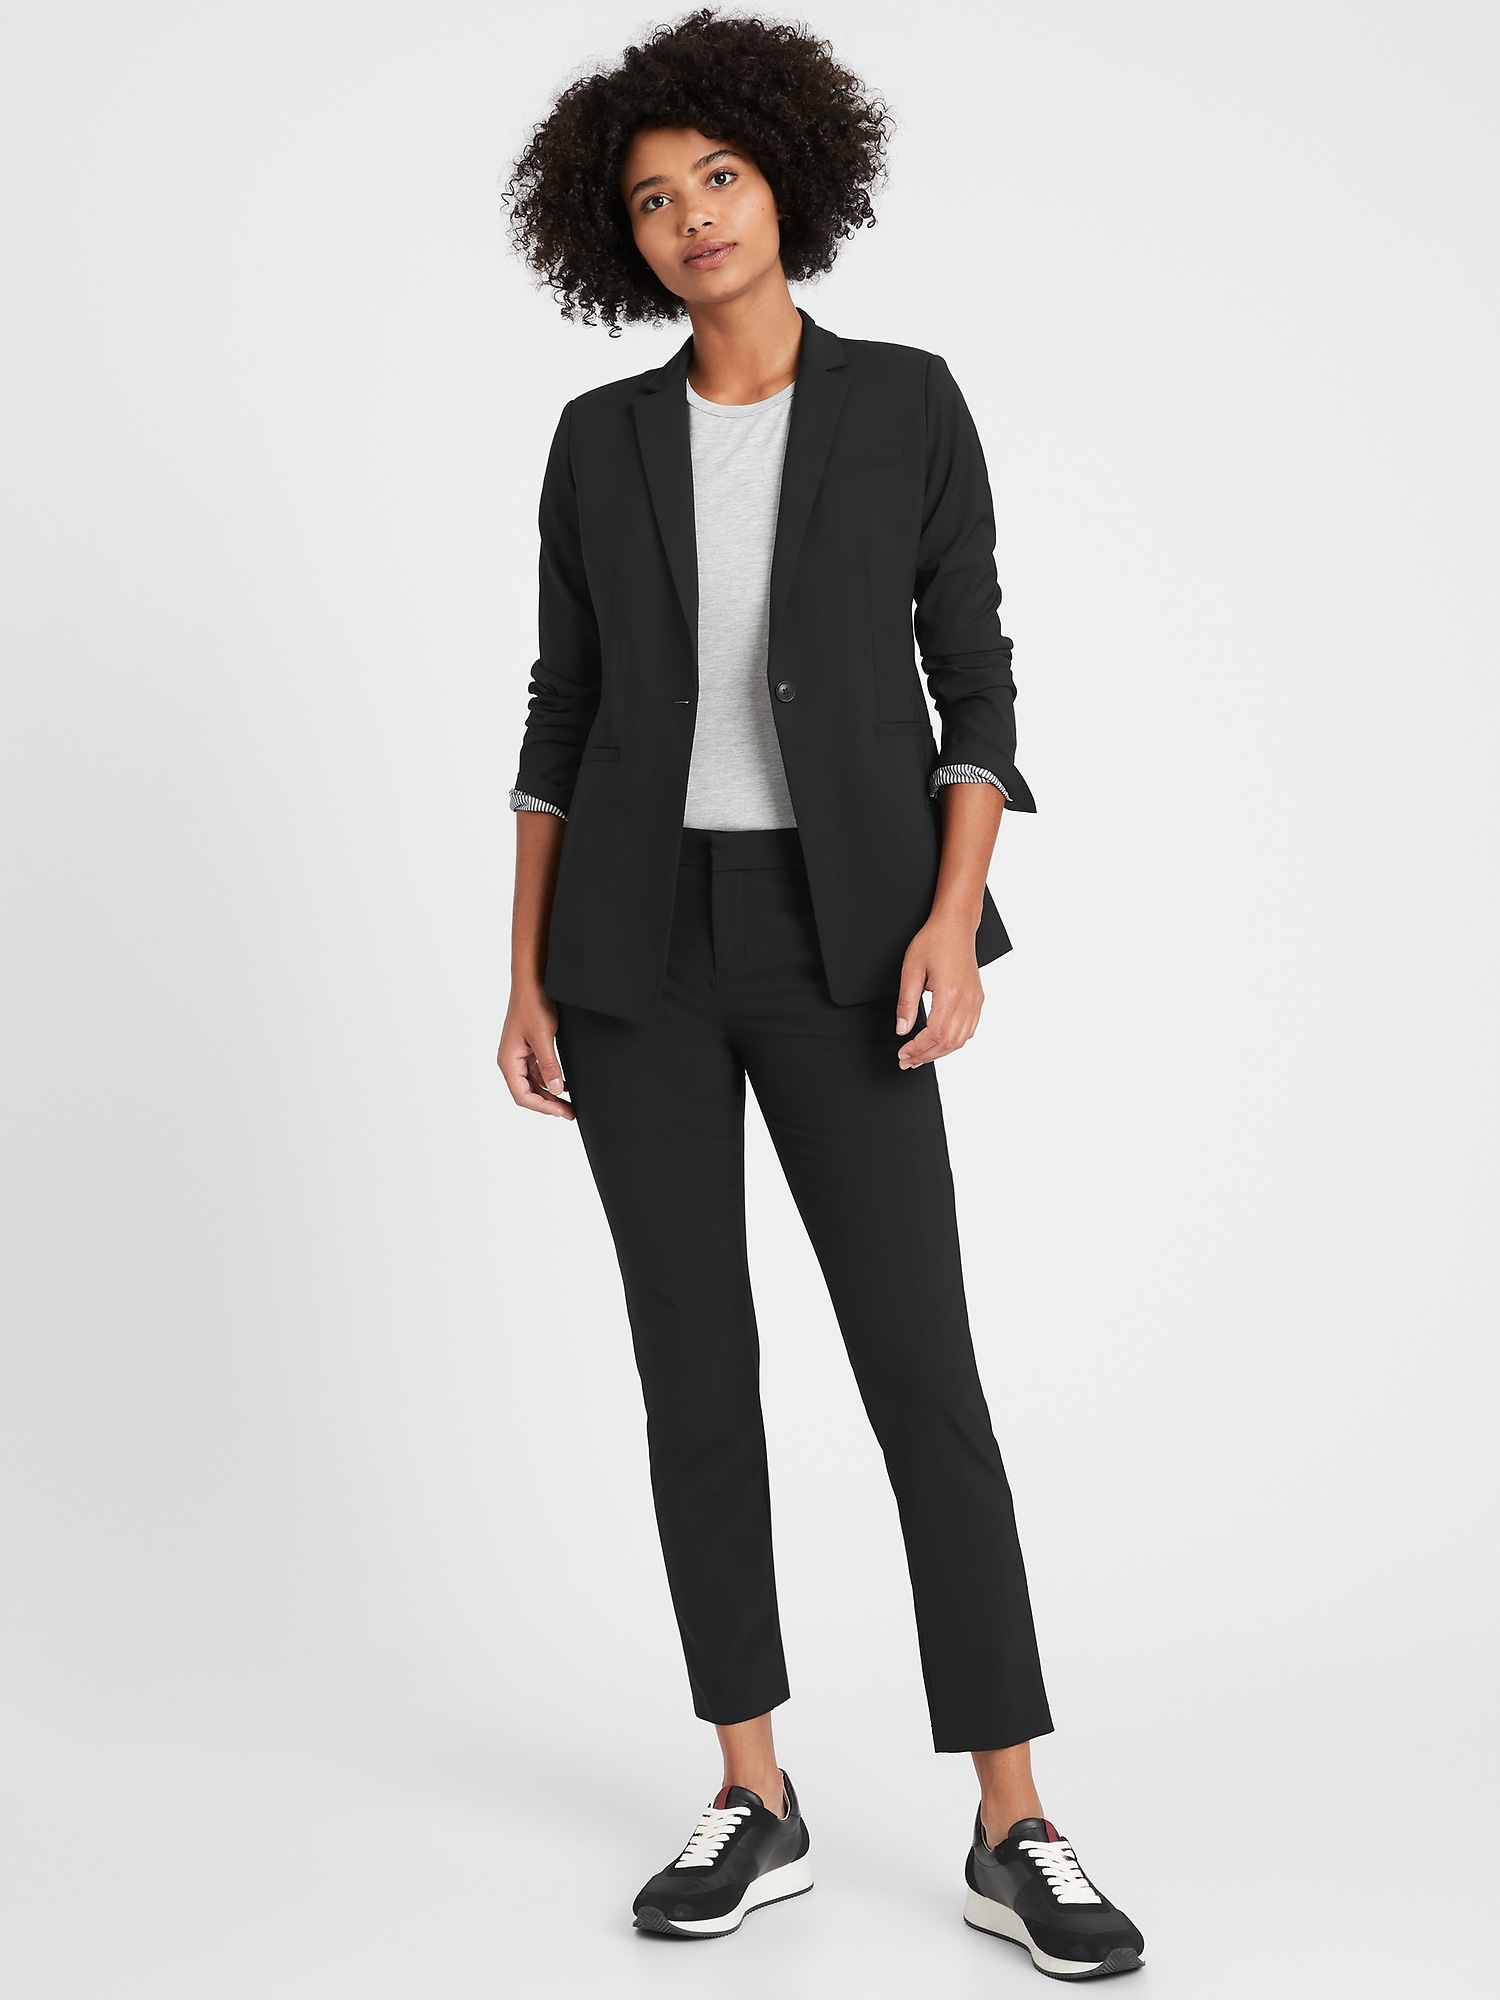 27 Things From Banana Republic That Reviewers Truly